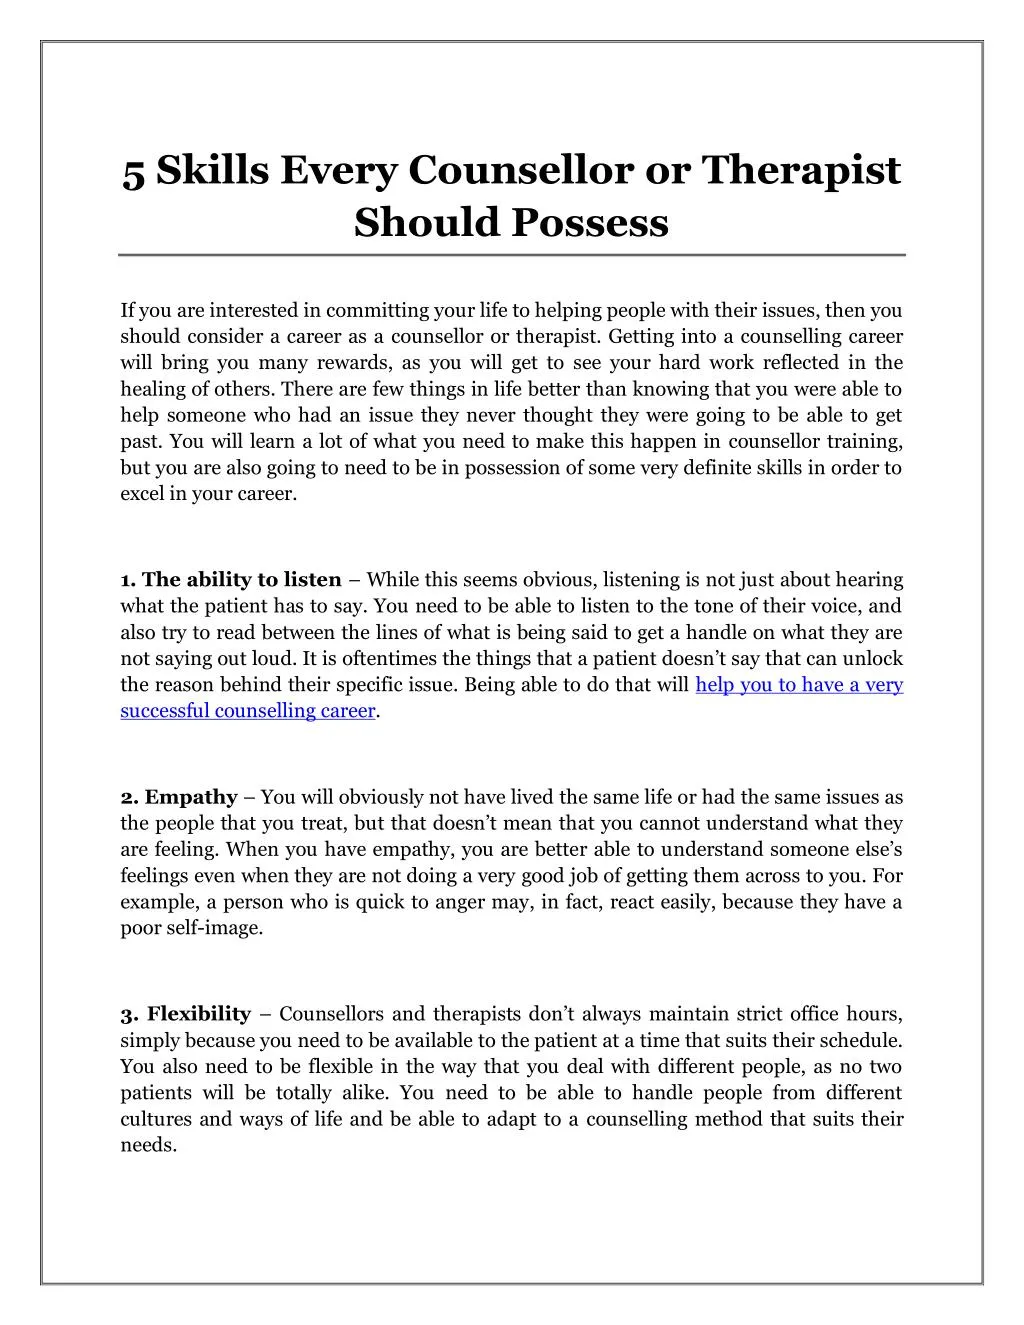 5 skills every counsellor or therapist should